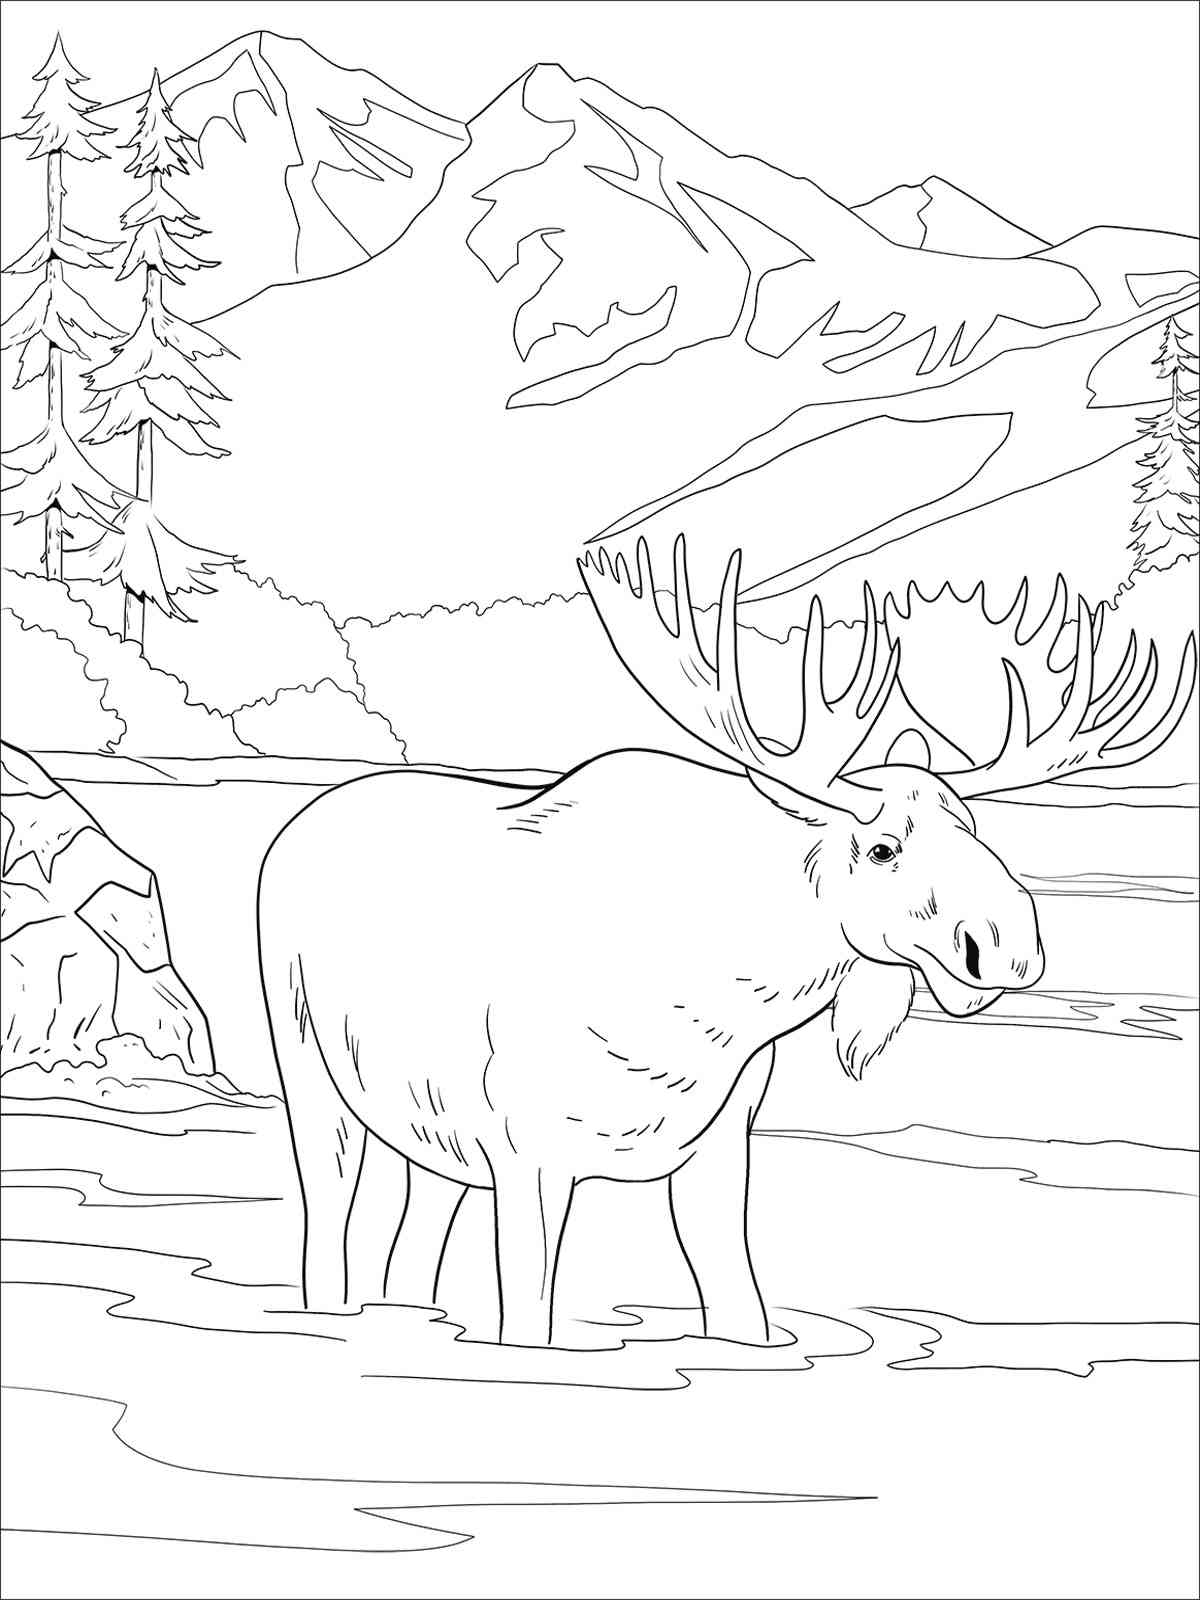 Moose in the River coloring page